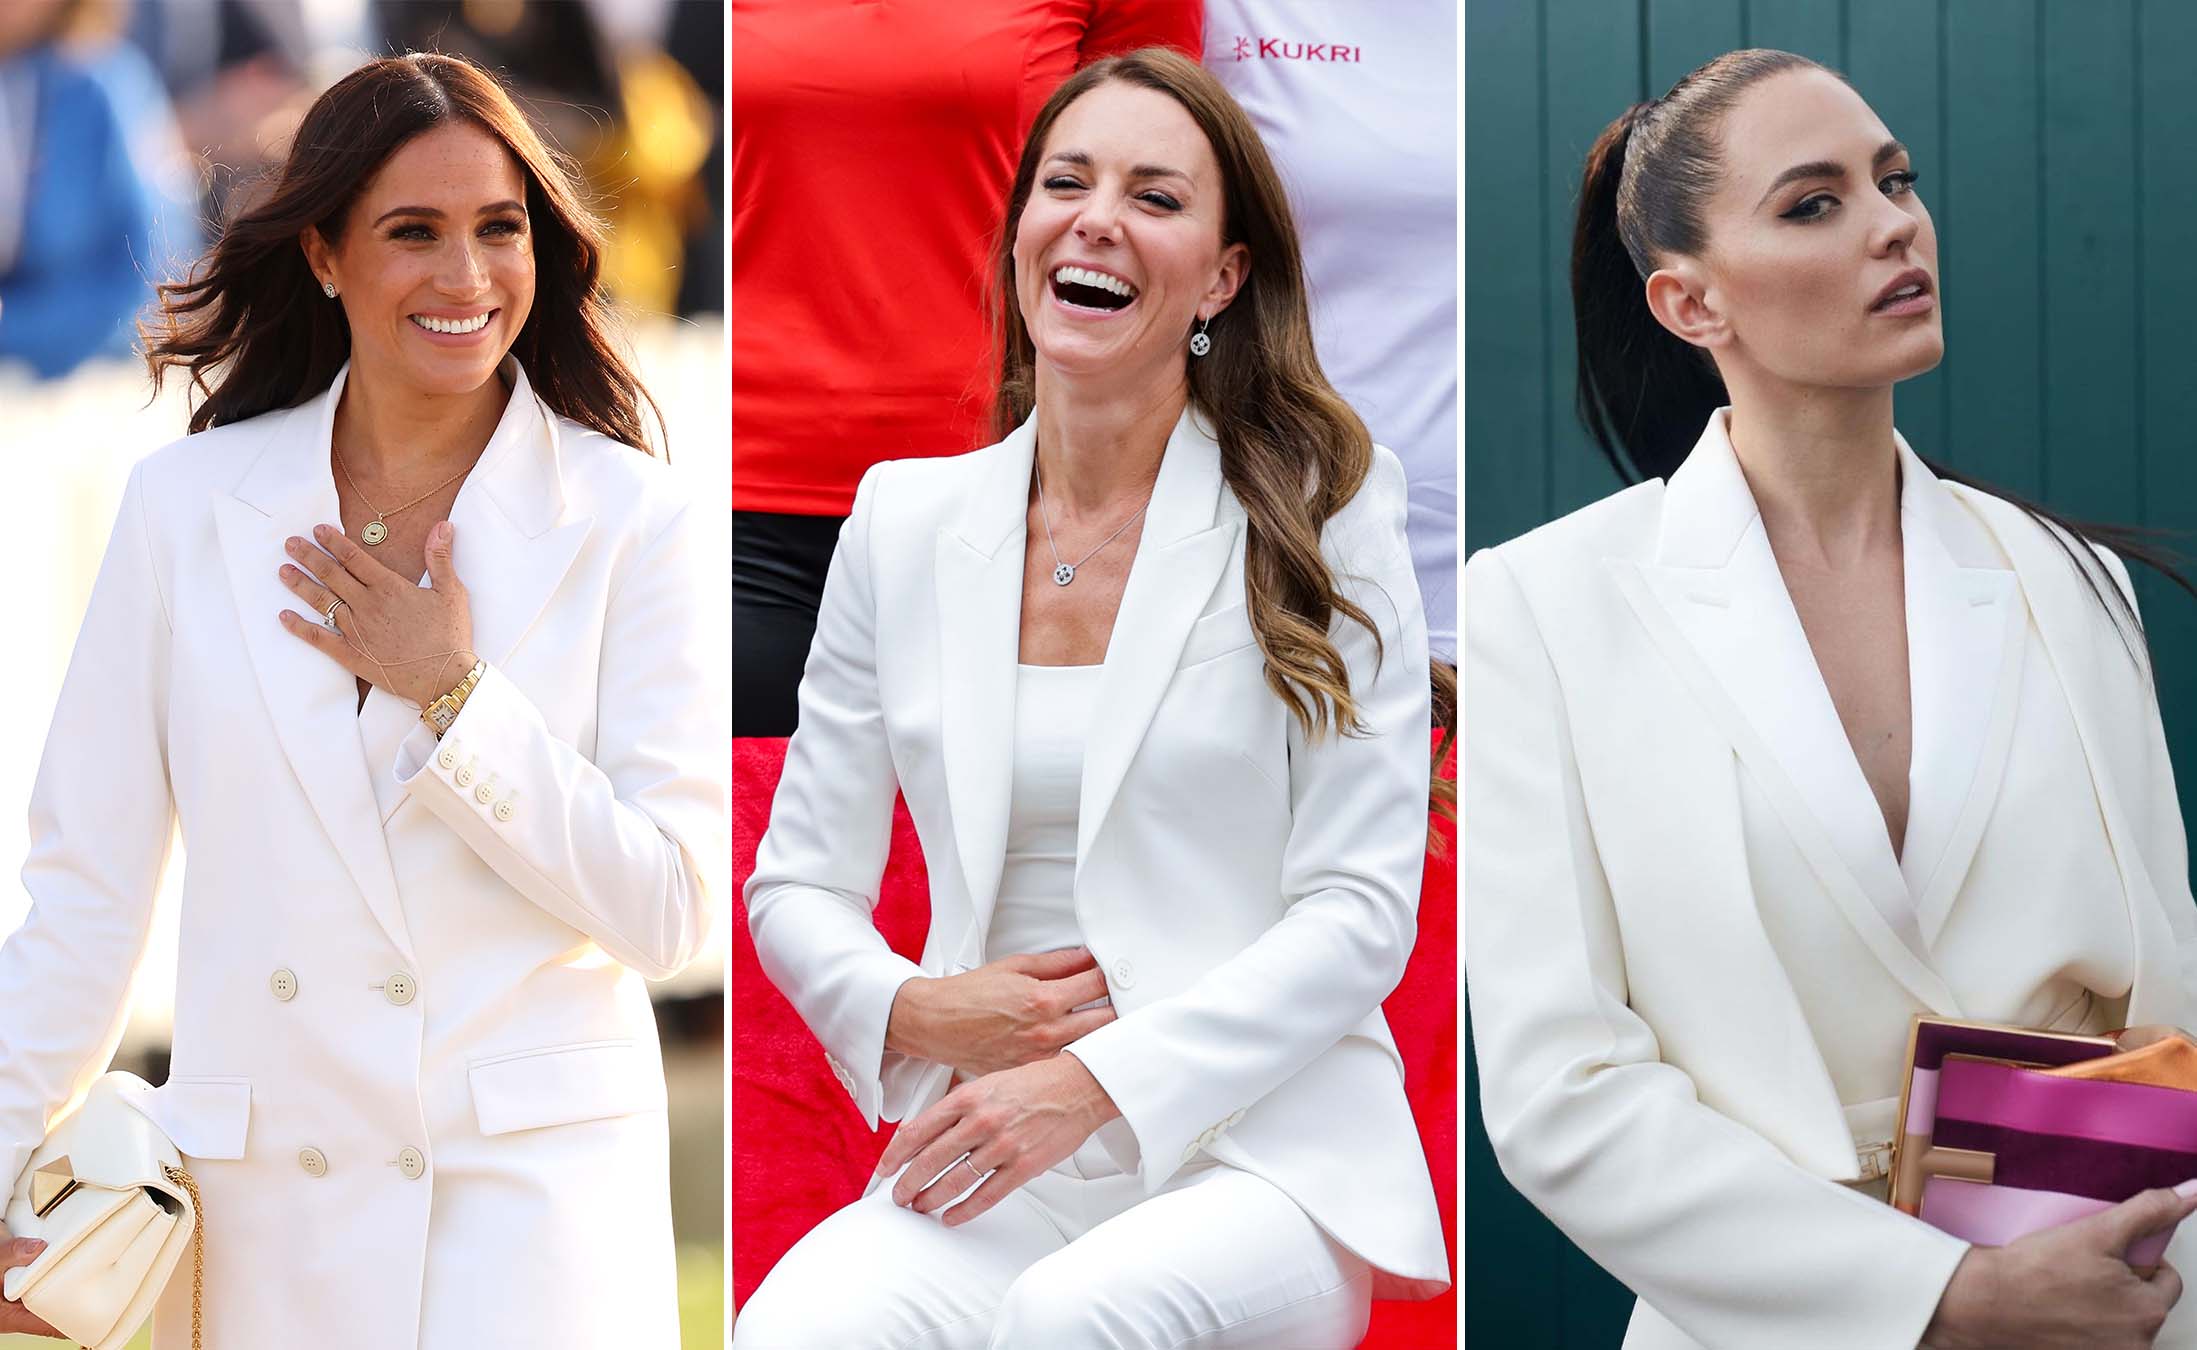 The fashion staple Kate Middleton, Meghan Markle, Victoria Beckham and Jesinta Franklin all adore in 2022